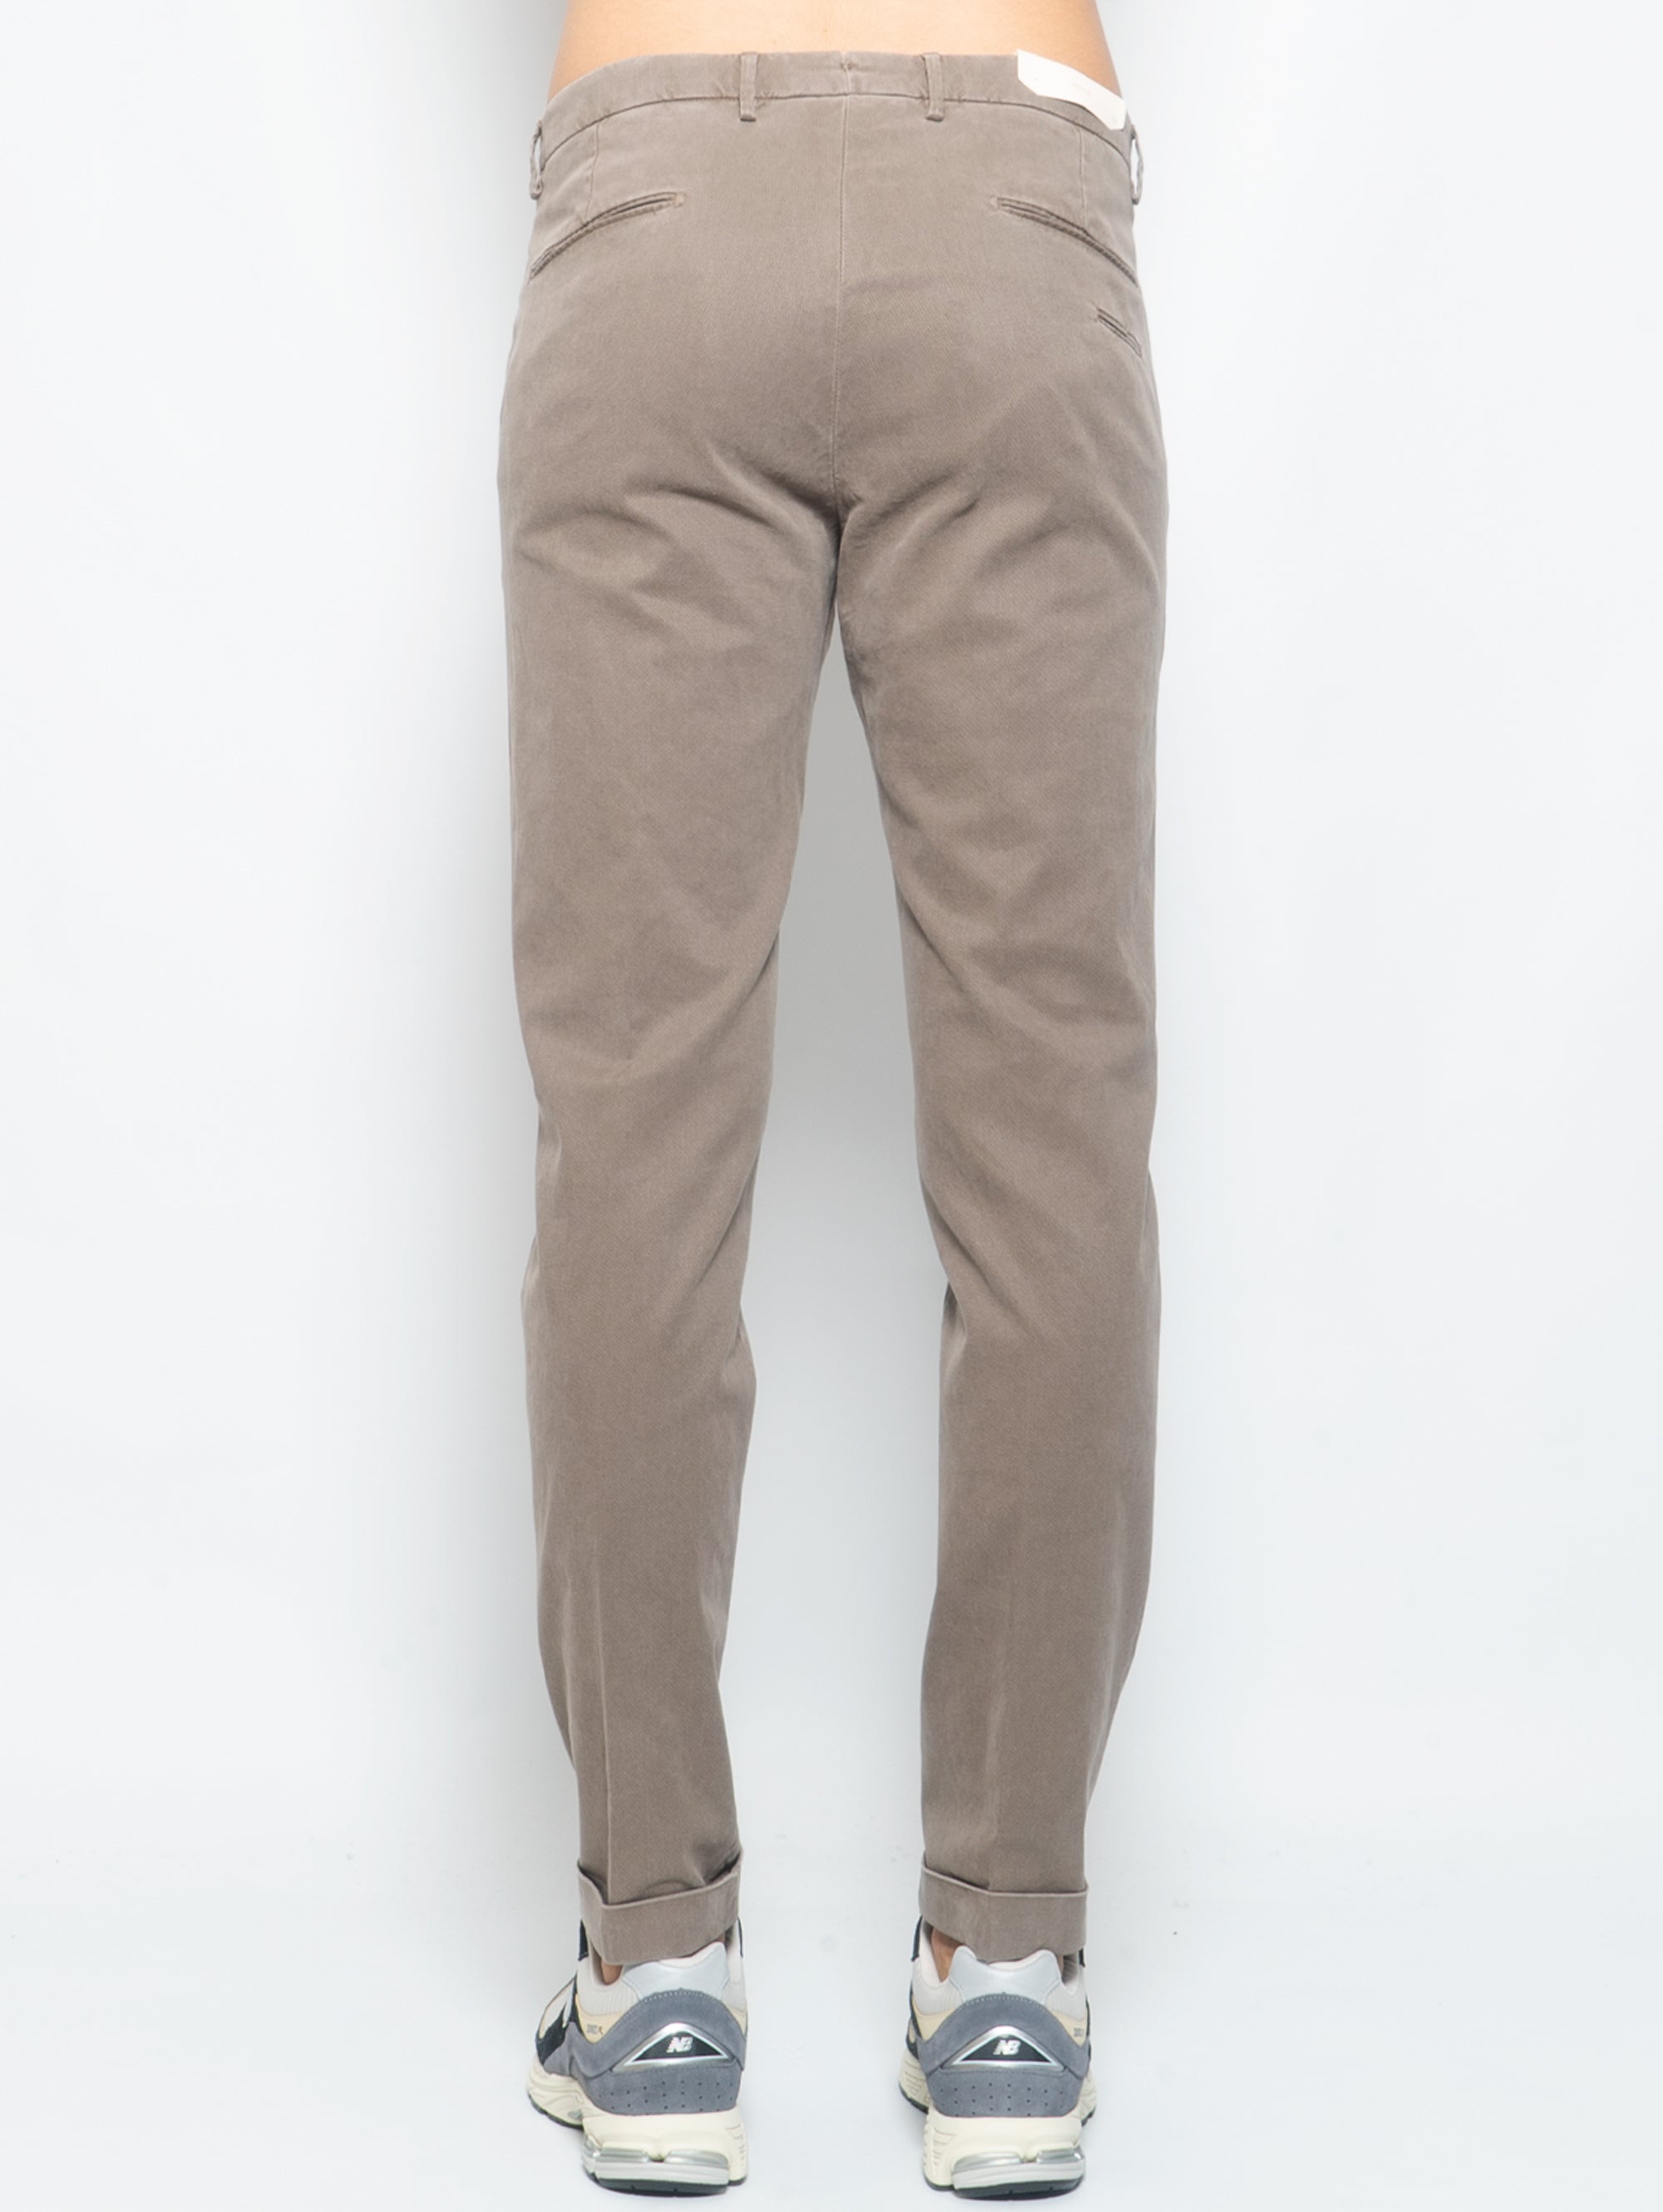 Chinos in Washed Dove Gray Textured Cotton